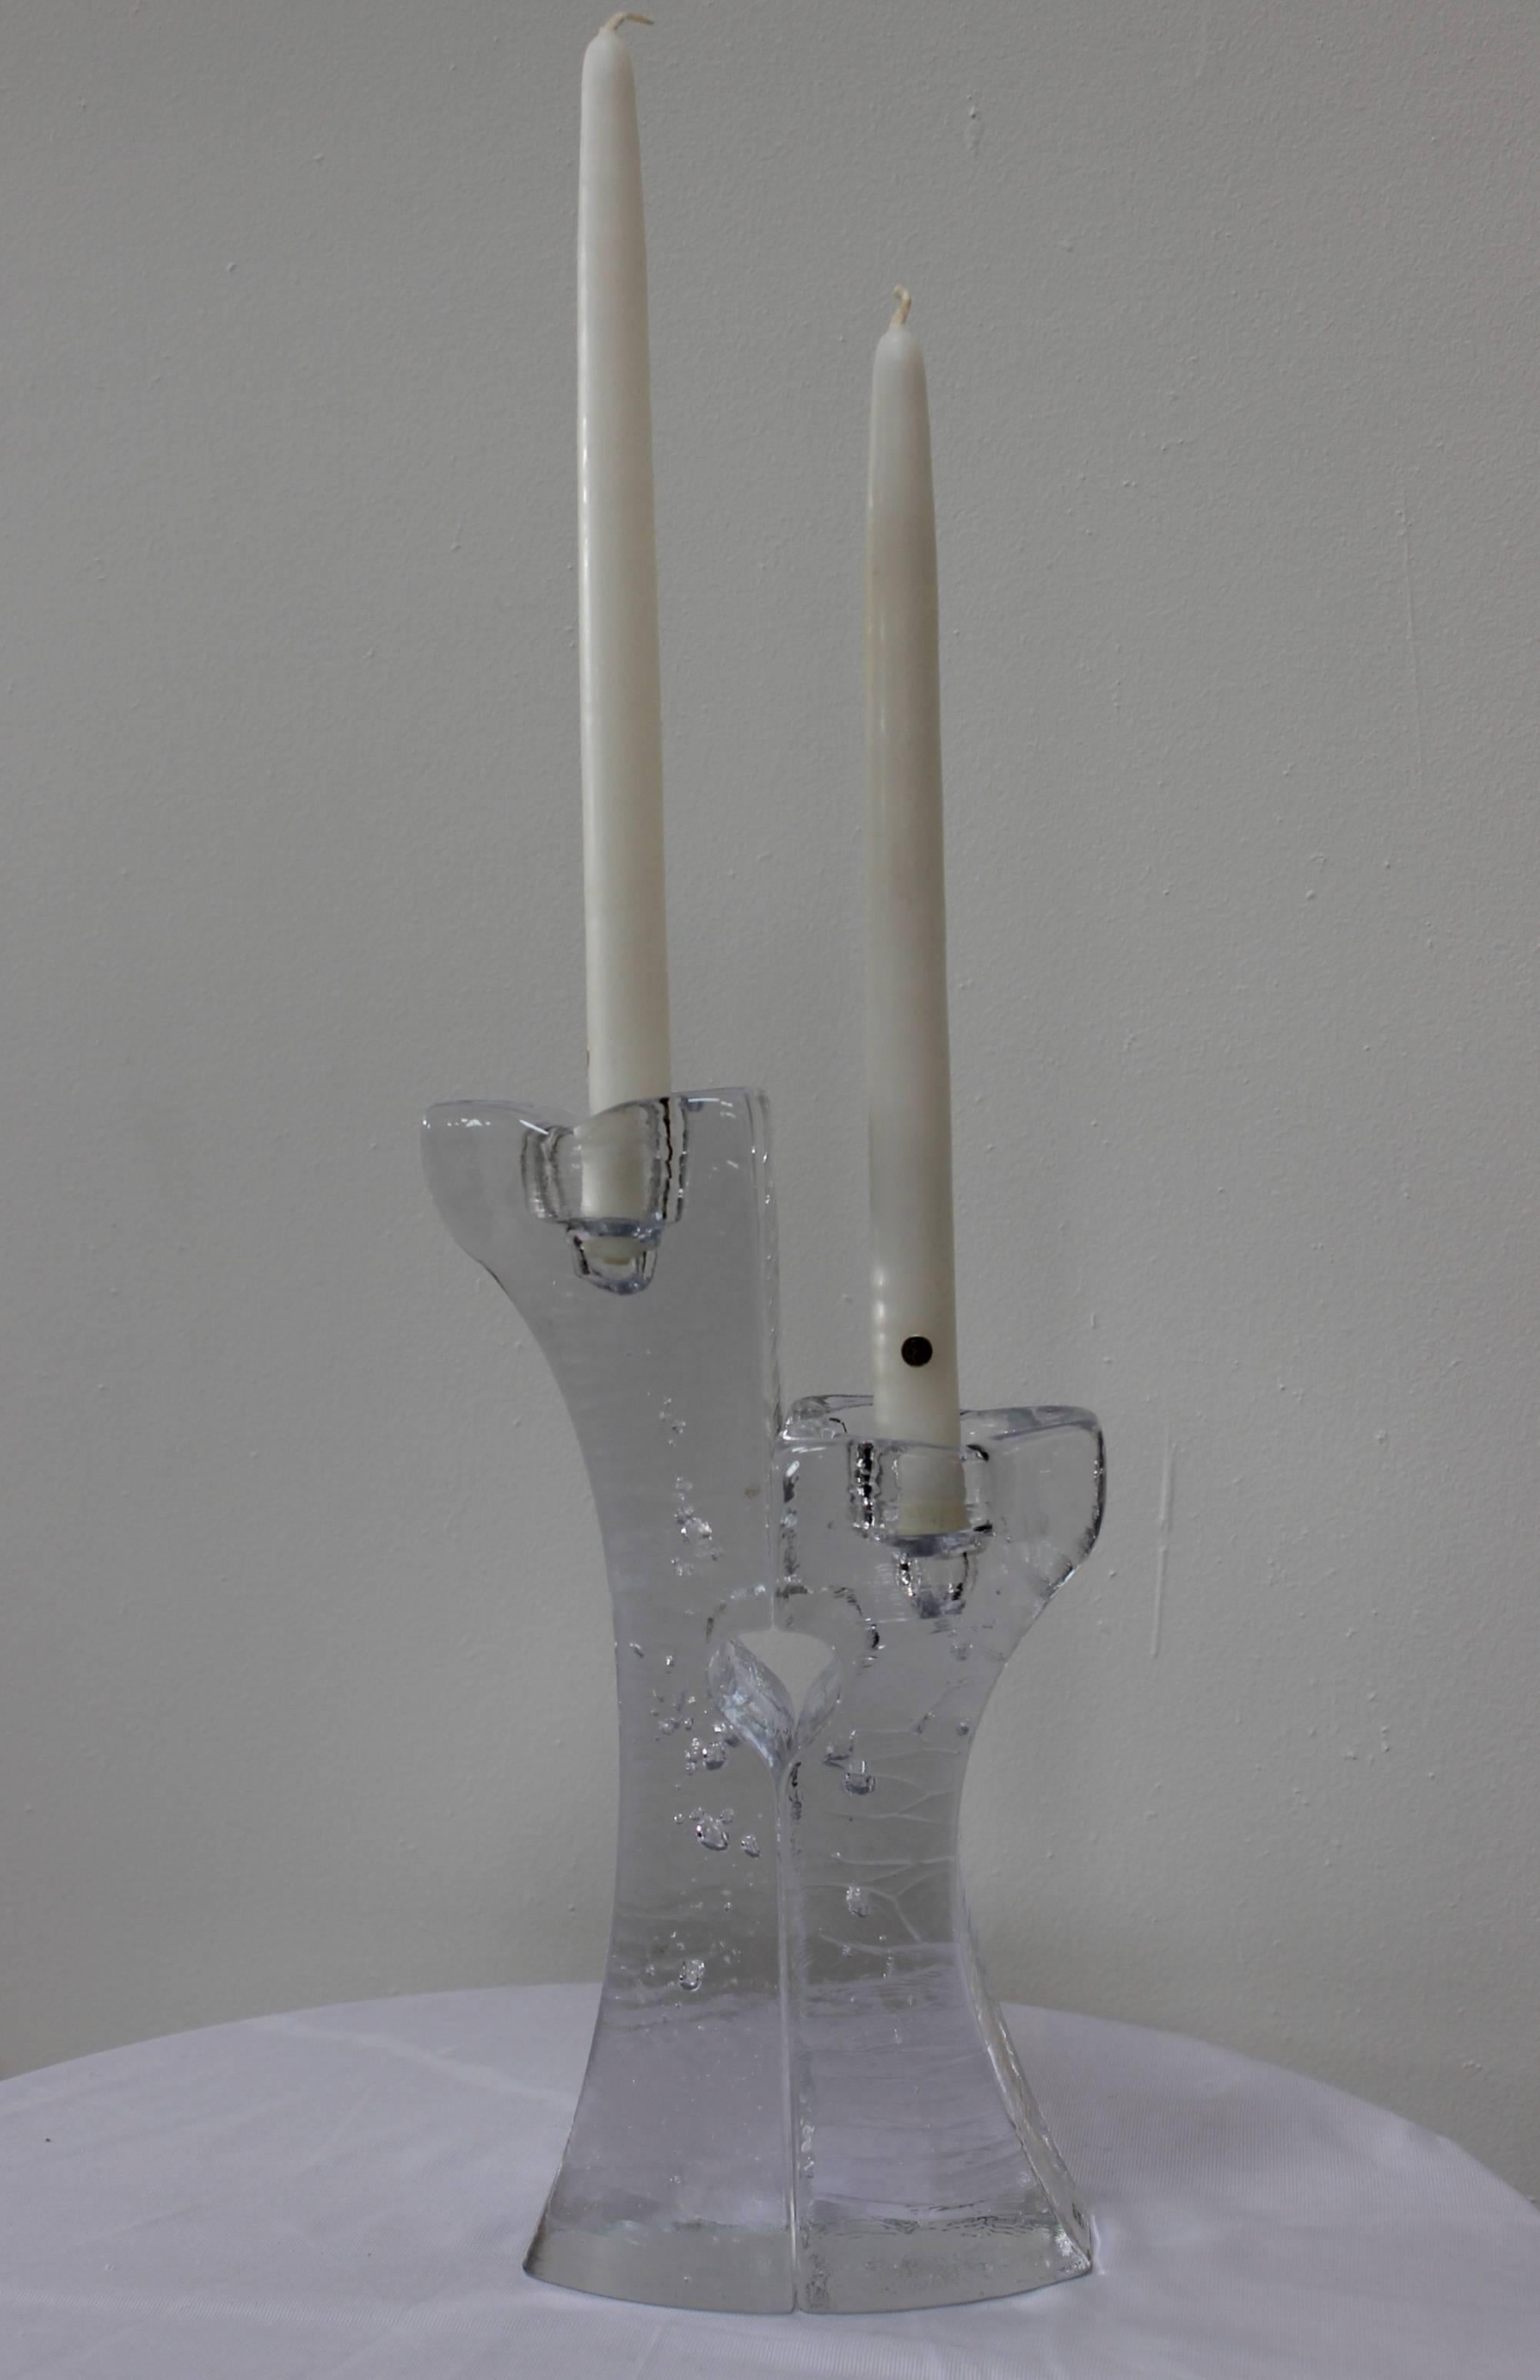 1970s modern glass candle holders by Kosta Boda.

Small candle holder width 3'' depth 3.5'' height 8.5''.